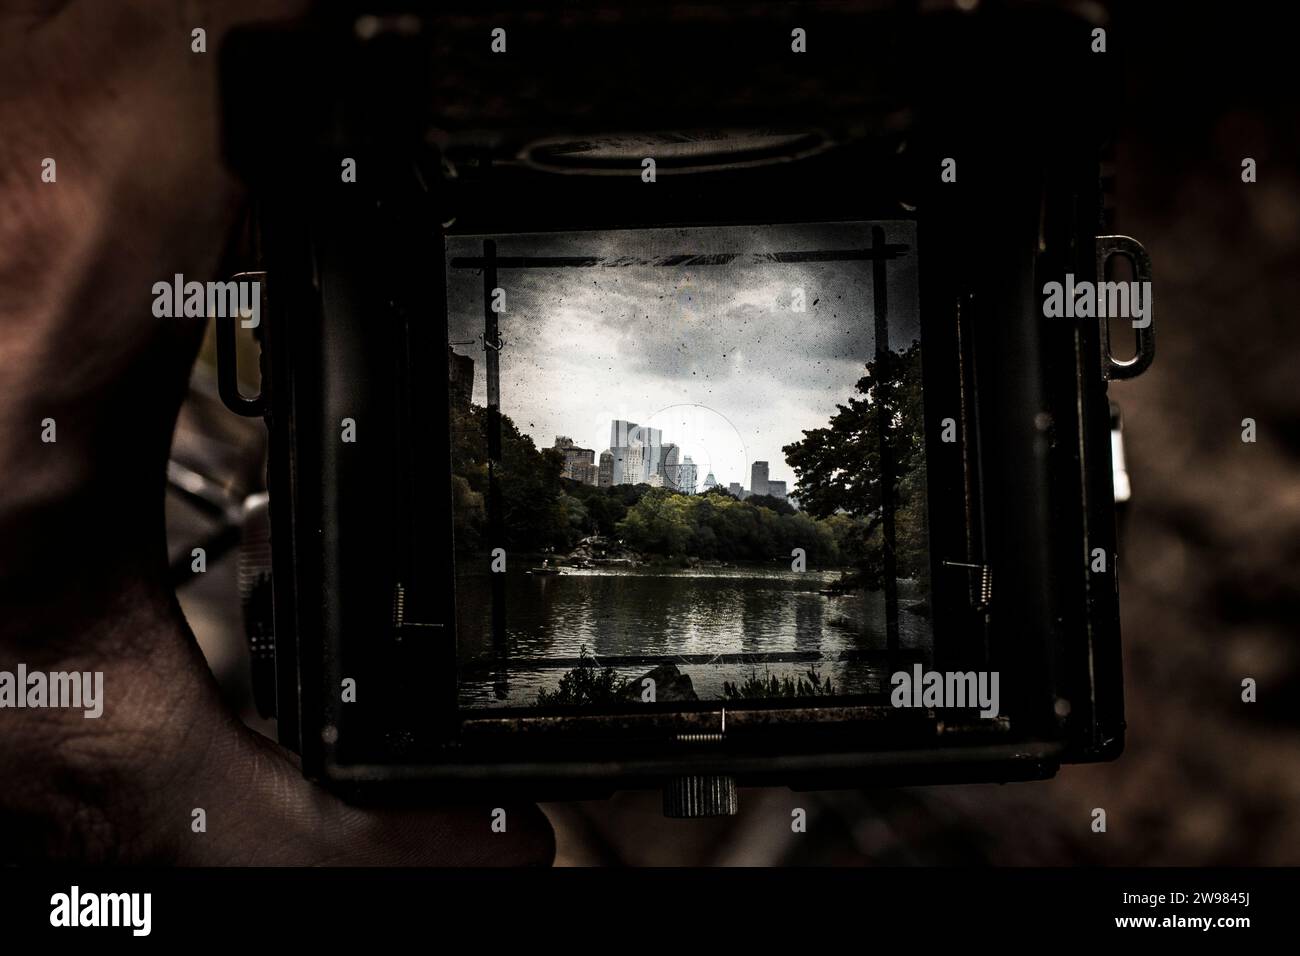 Looking through a vintage camera's viewfinder Stock Photo